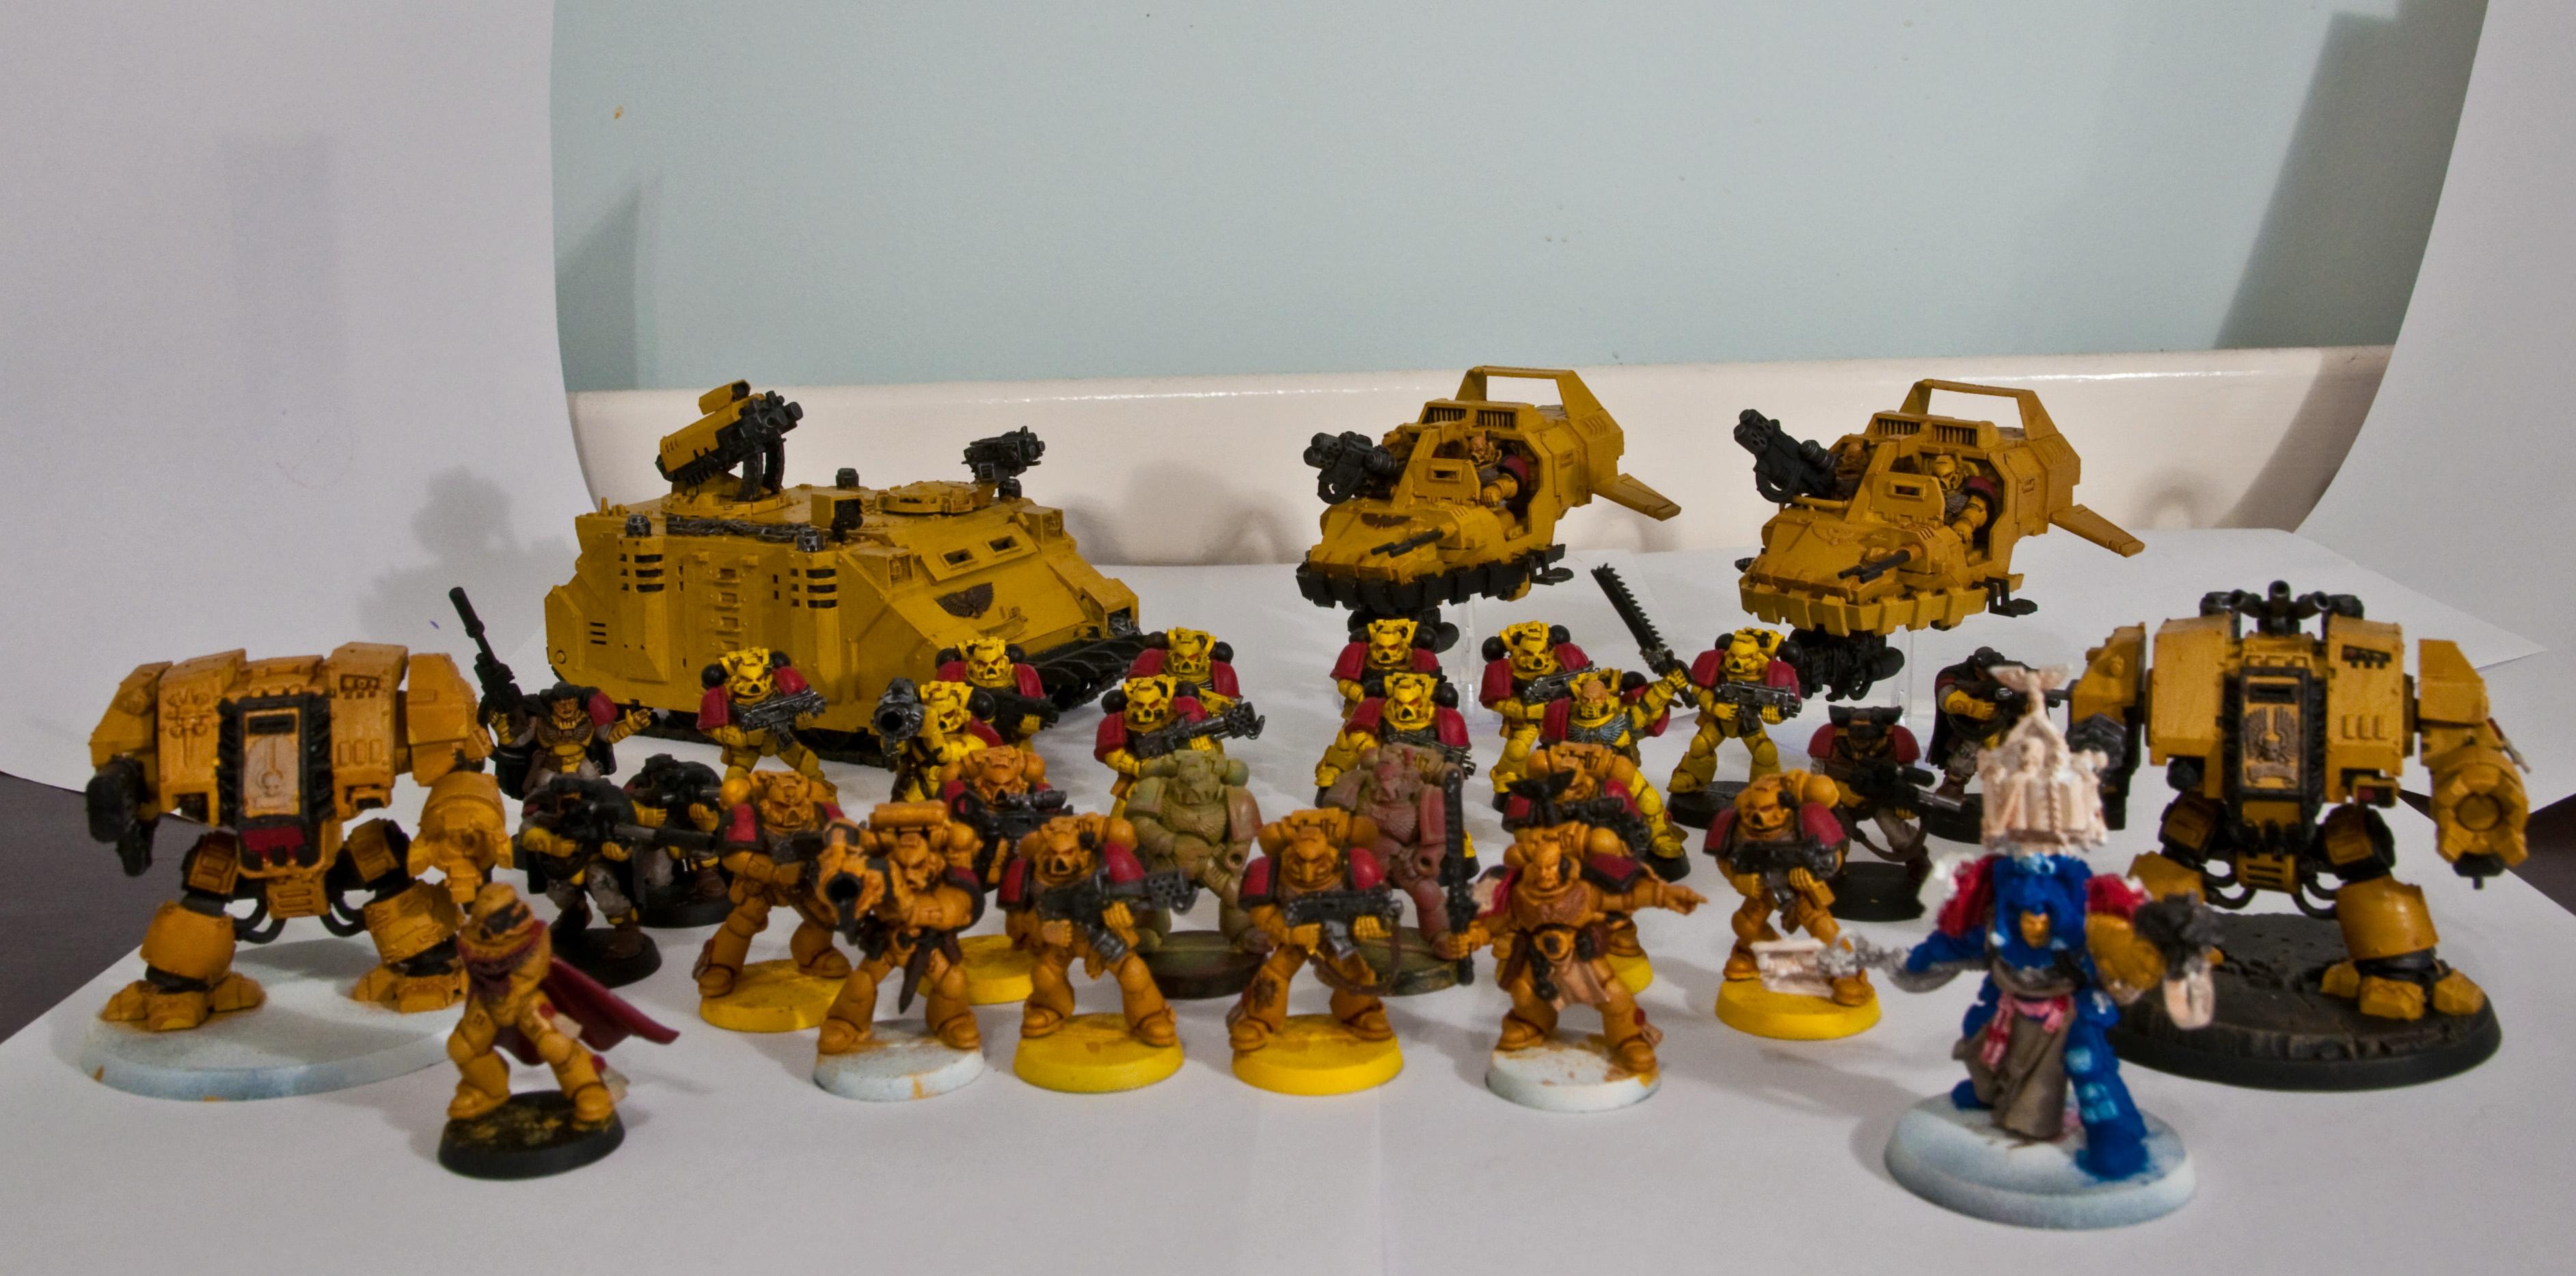 Here's the whole gang, minus a Predator and 3 drop pods which I have primered and ready to paint